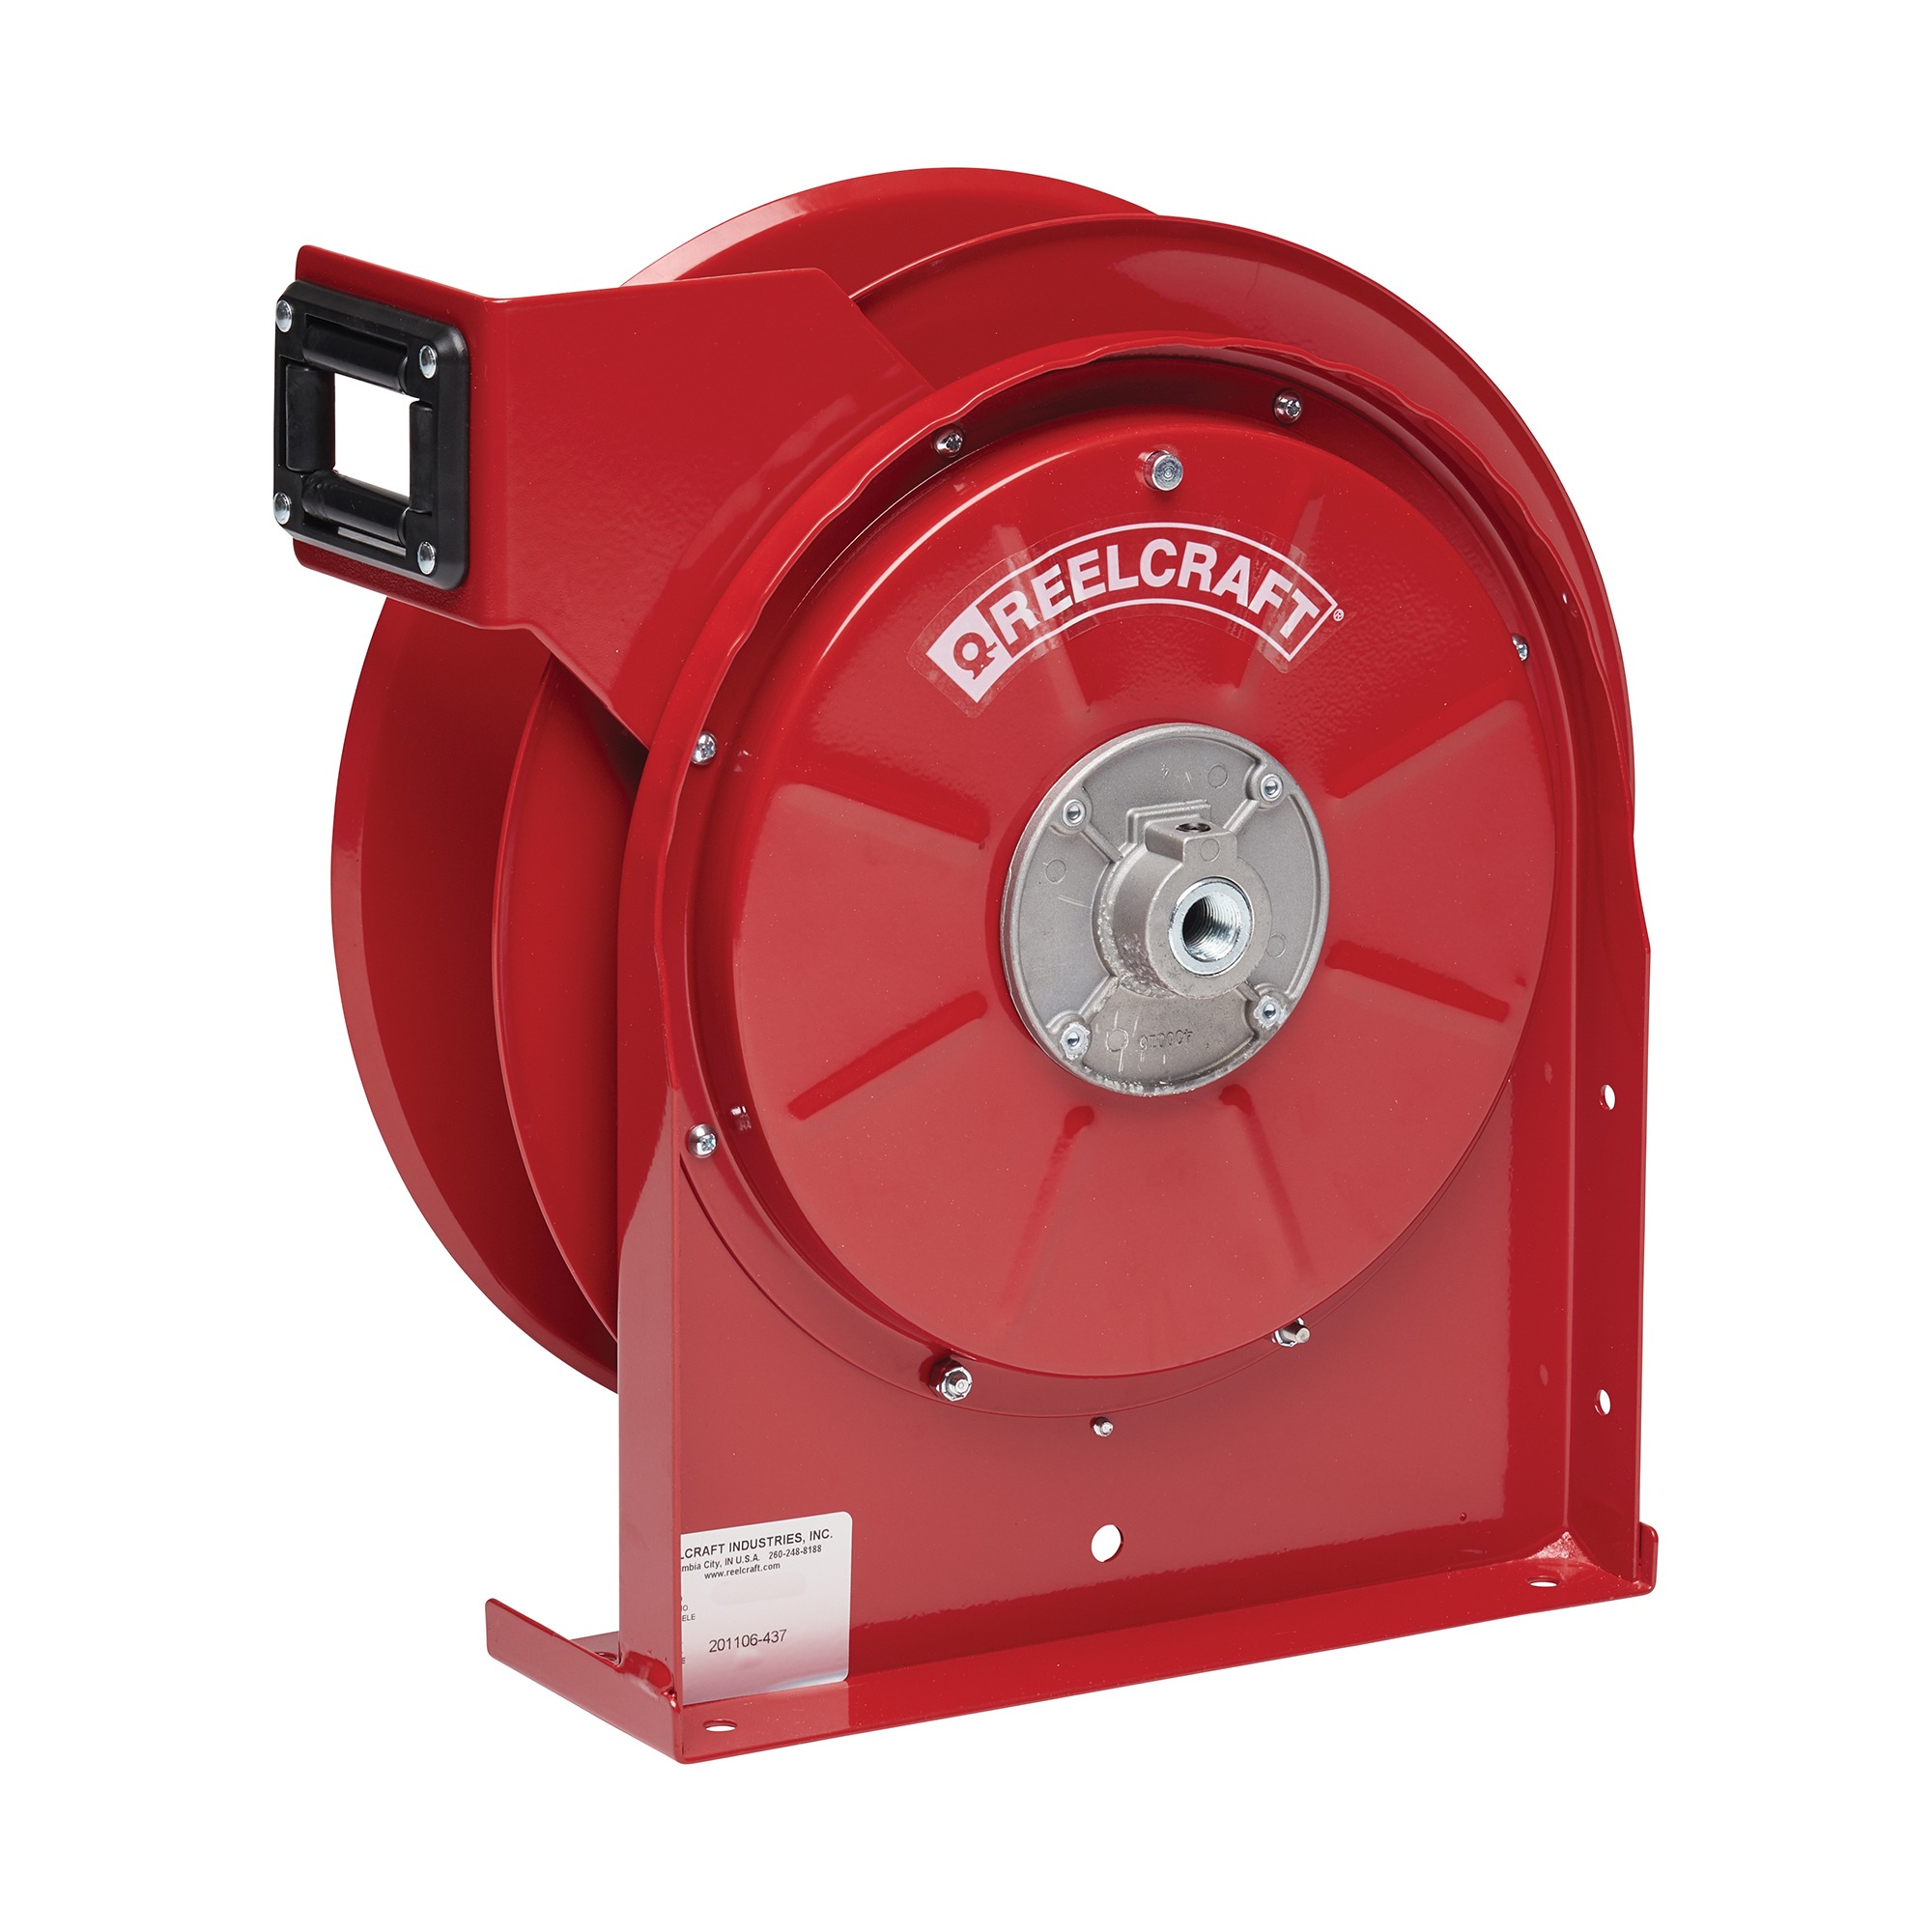 Reelcraft 5400 OHP - 1/4 in. x 30 ft. Premium Duty Hose Reel